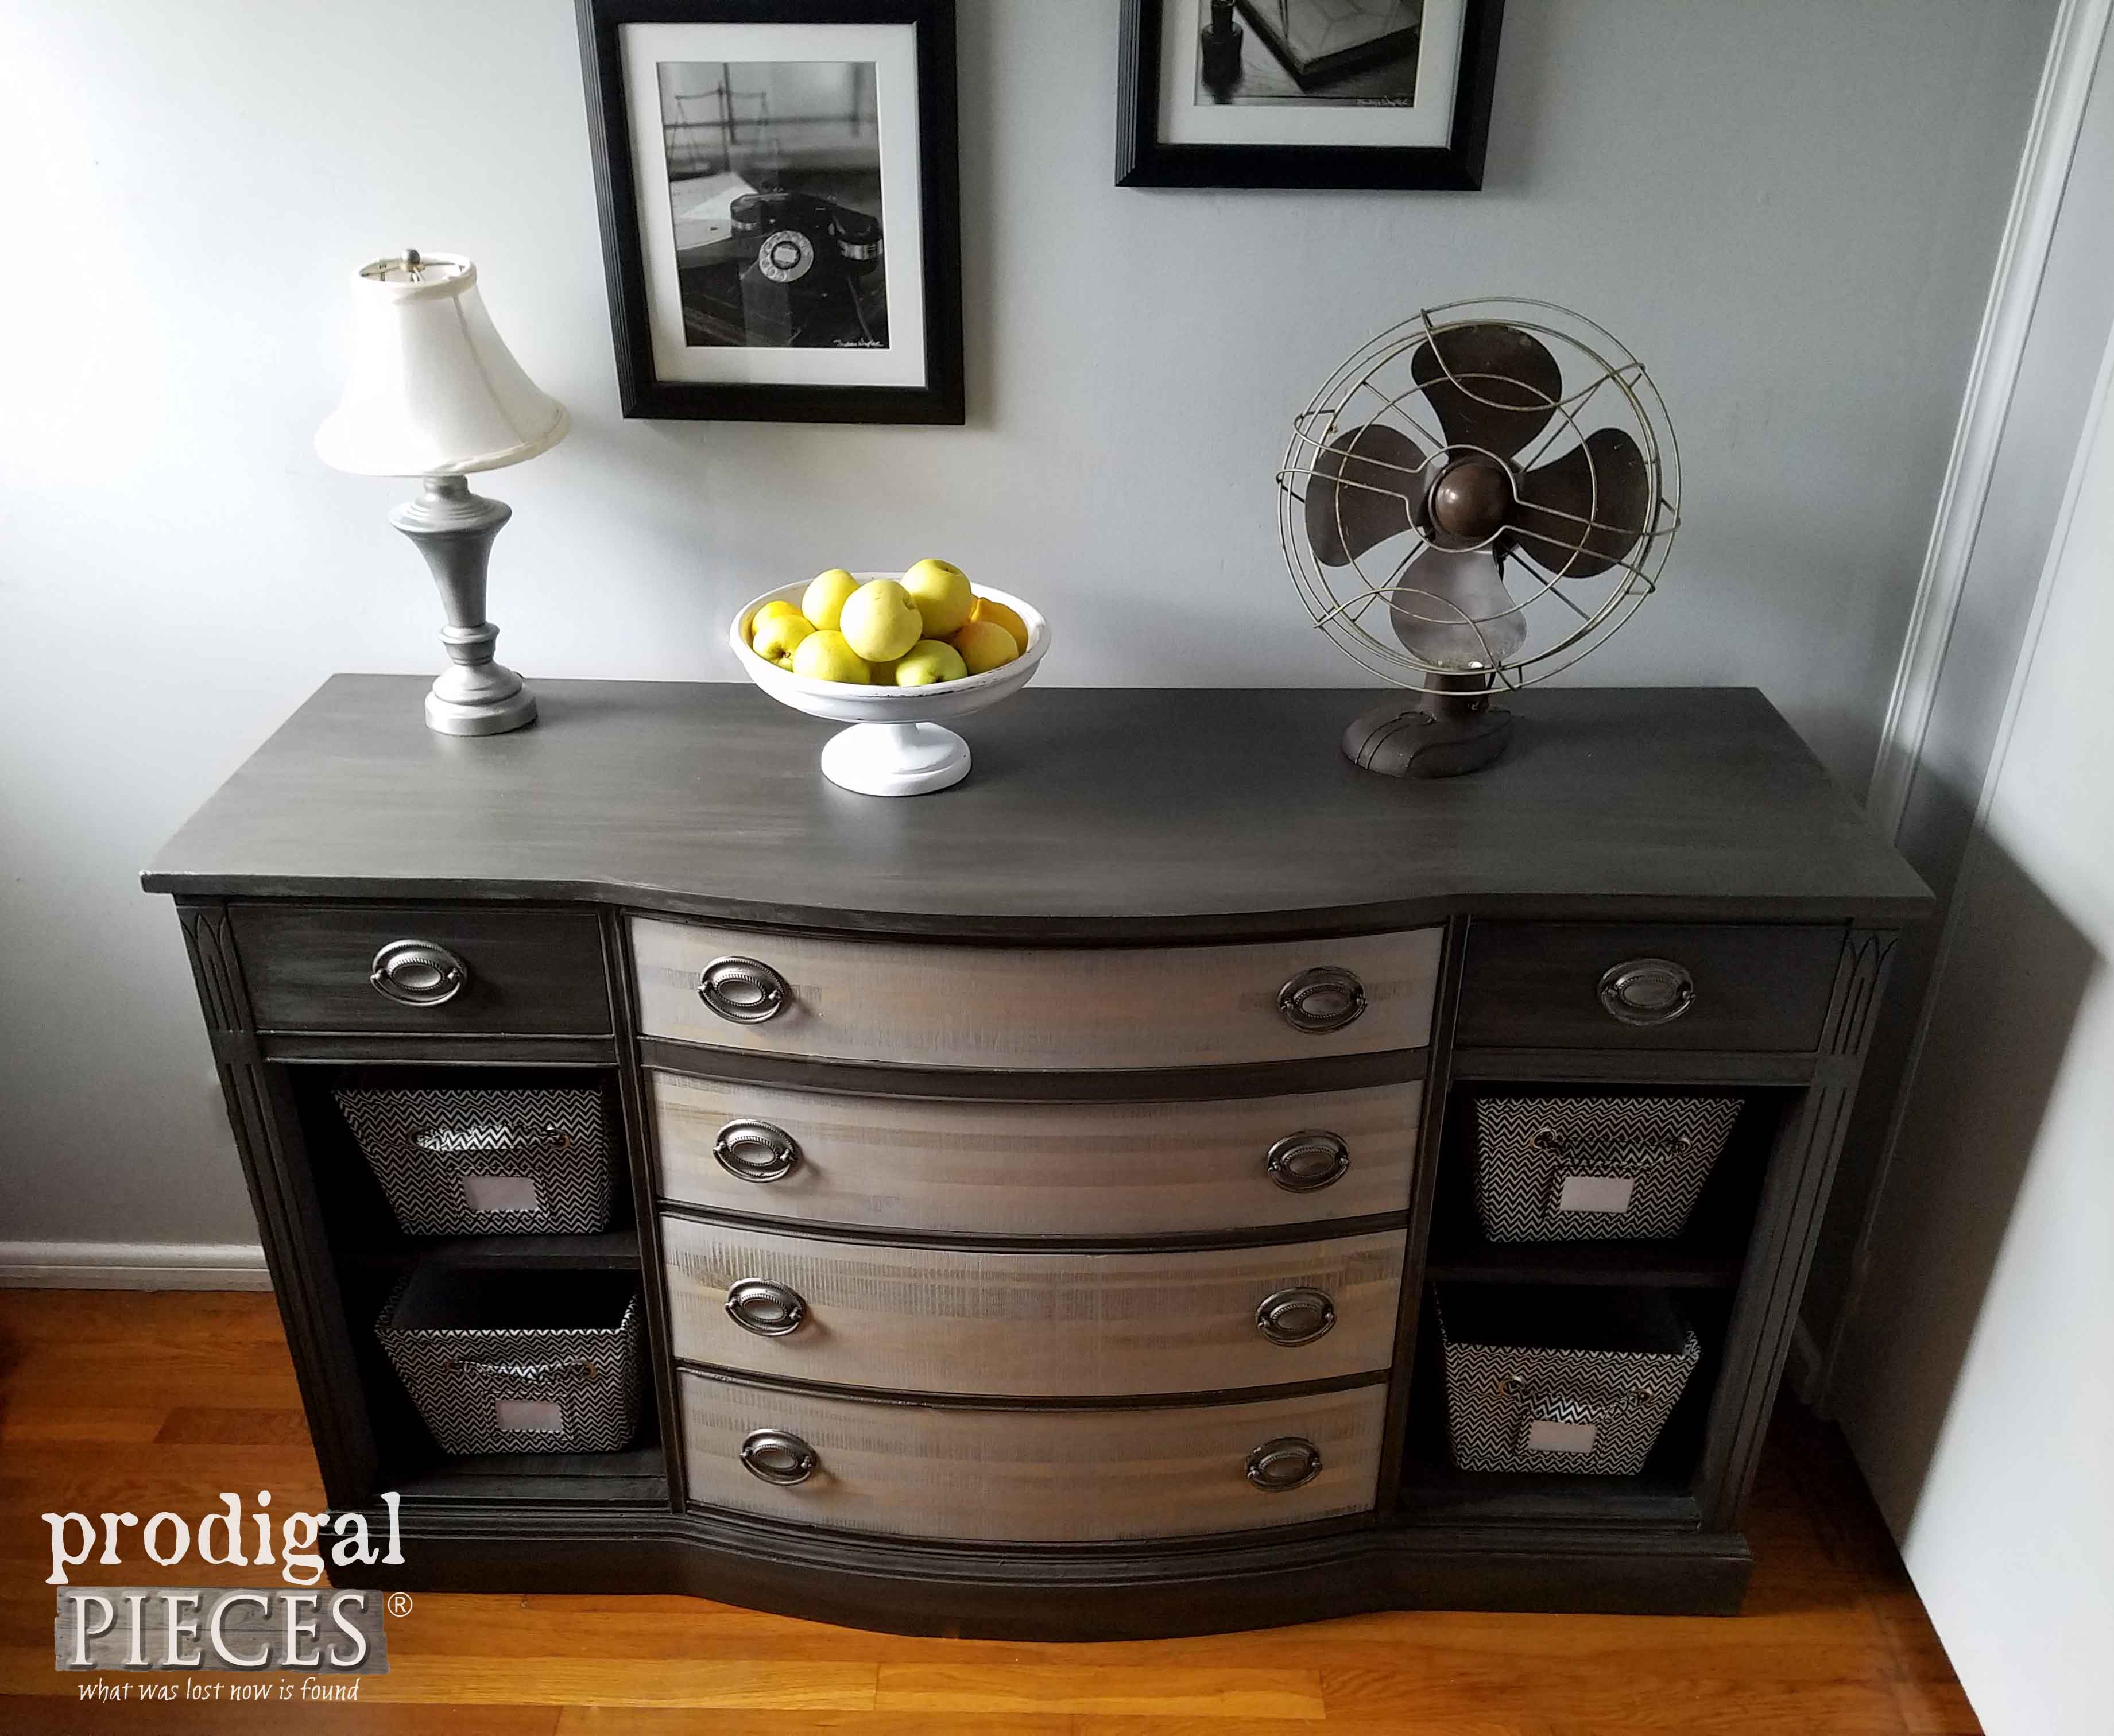 Updated Vintage Buffet Made Over by Teenage Boy | Prodigal Pieces | prodigalpieces.com